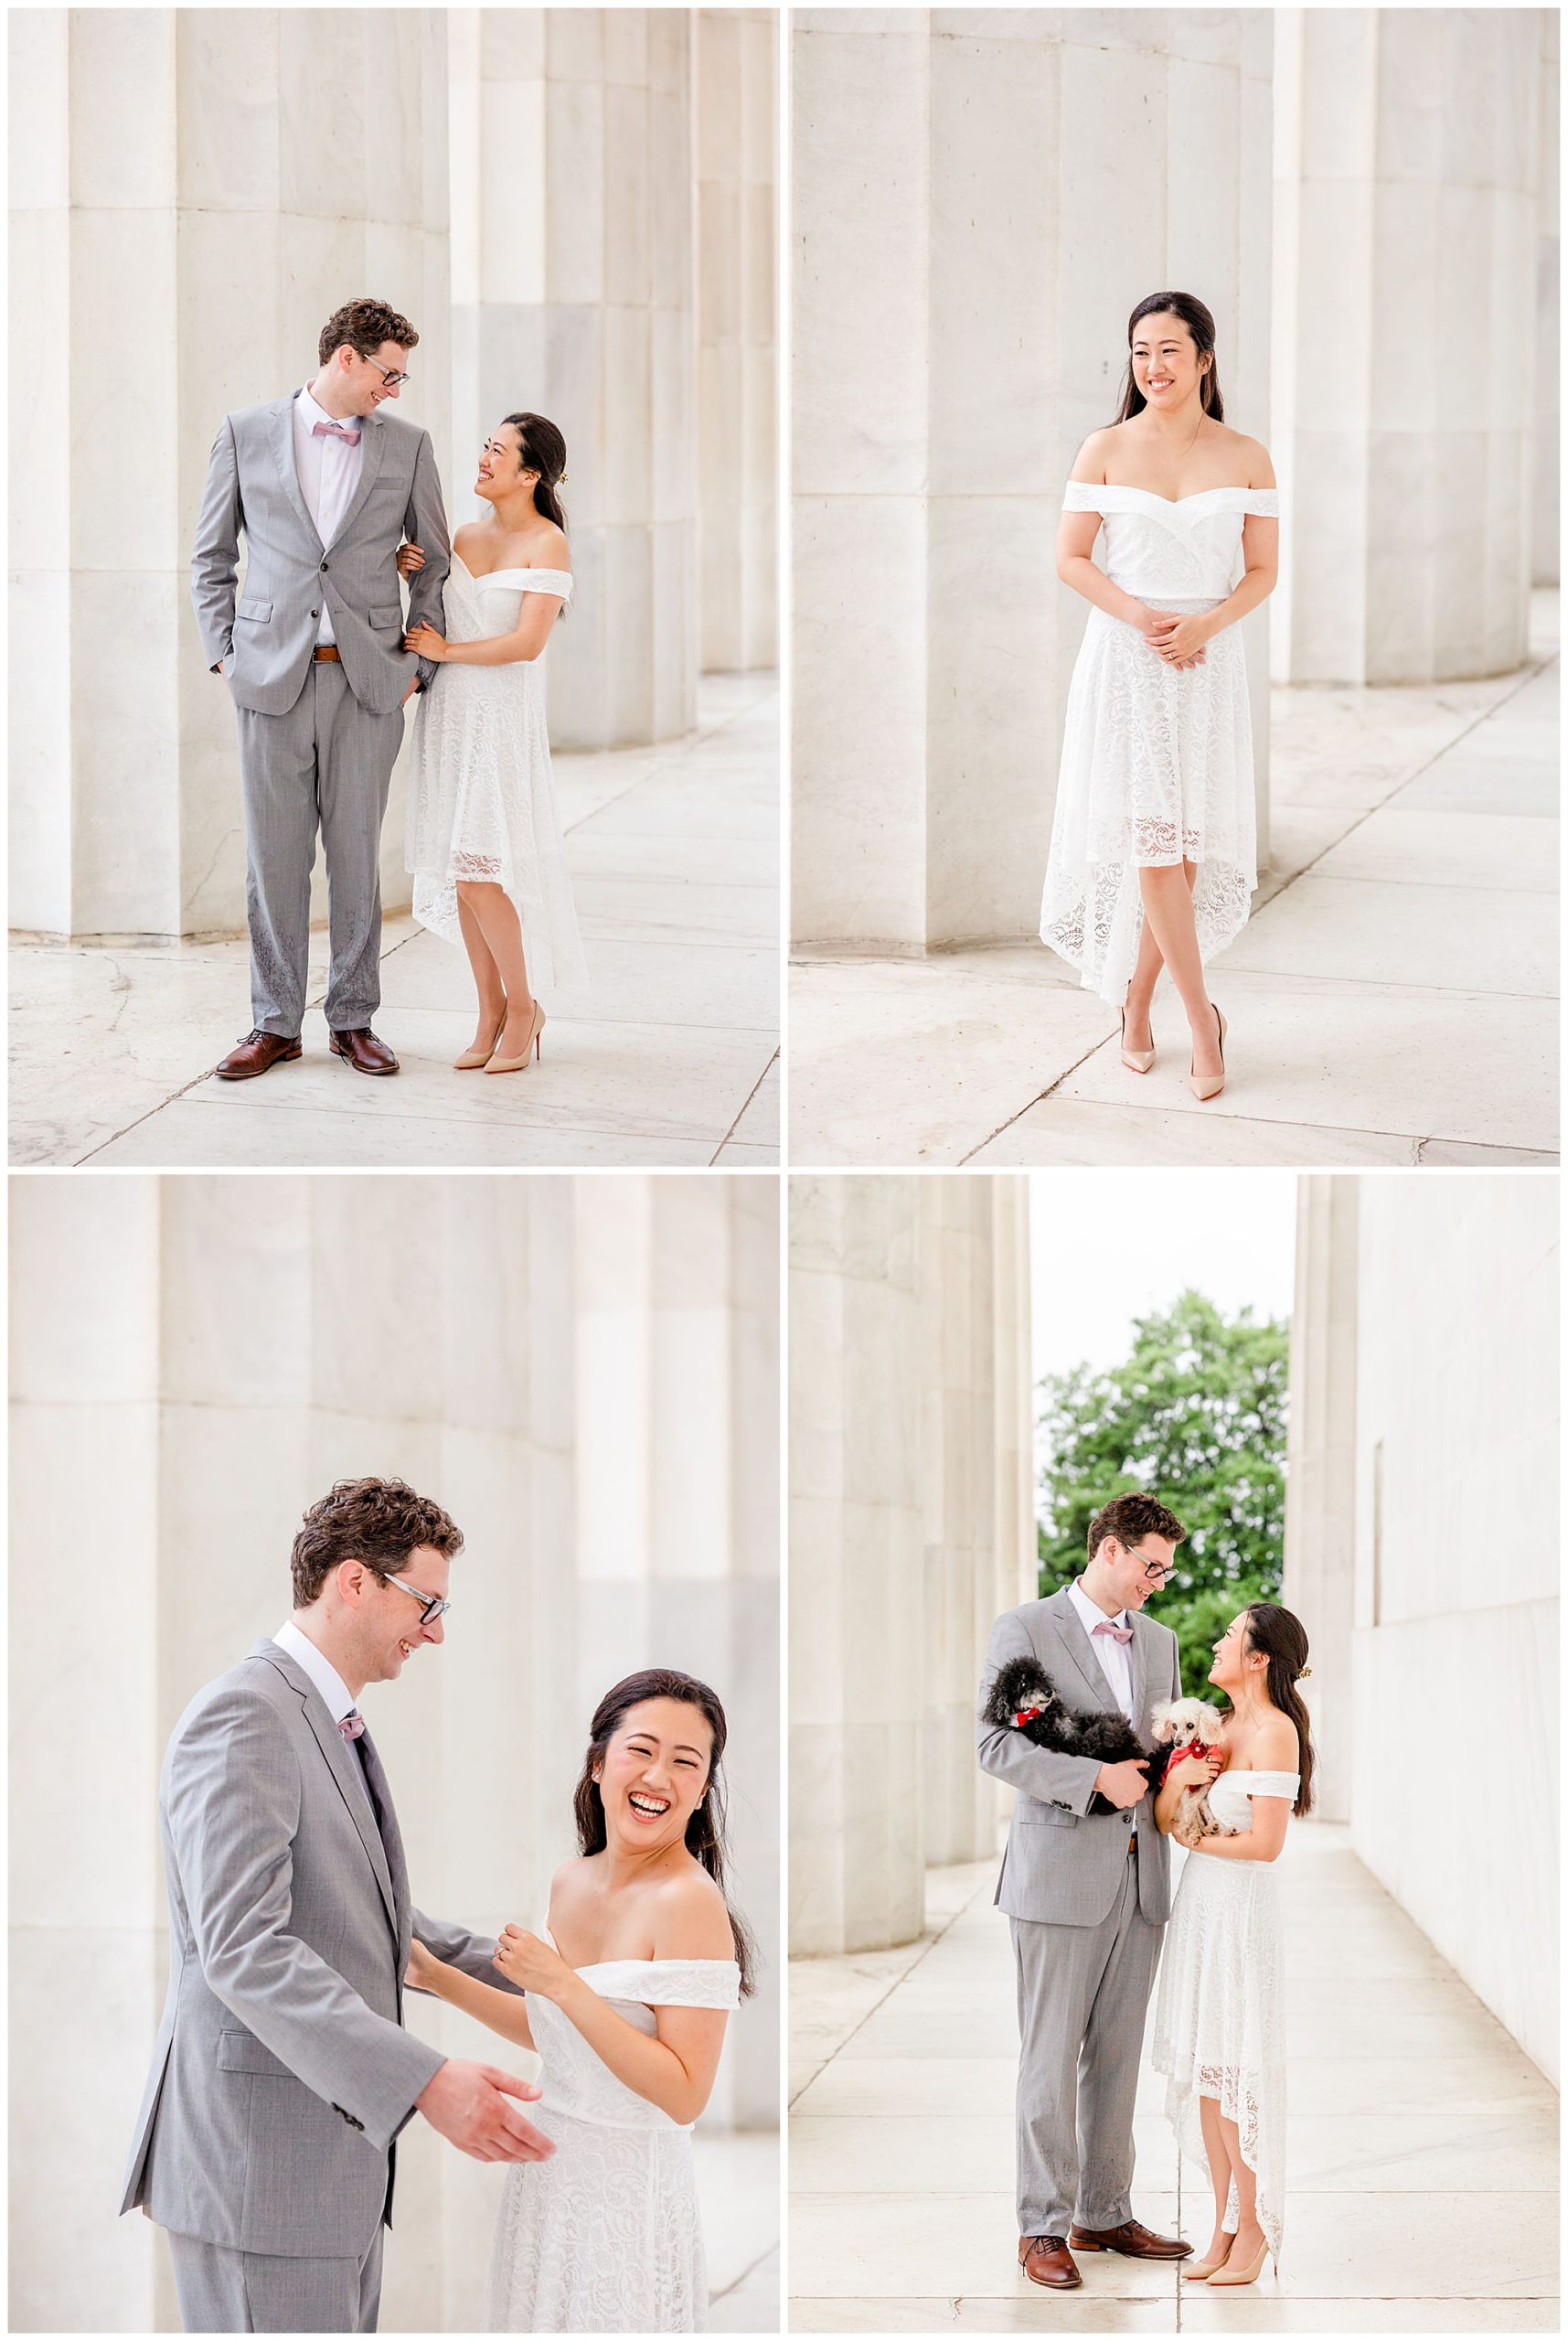 sunrise and sunset DC wedding, DC wedding photos, DC wedding portraits, micro-wedding, DC micro-wedding photography, DC micro-wedding photographer, DC petite wedding photographer, northern Virginia wedding photography, natural light wedding photography, unique wedding, Rachel E.H. Photography, couple holding dogs, couple laughing, woman holding mans arm, bride smiling